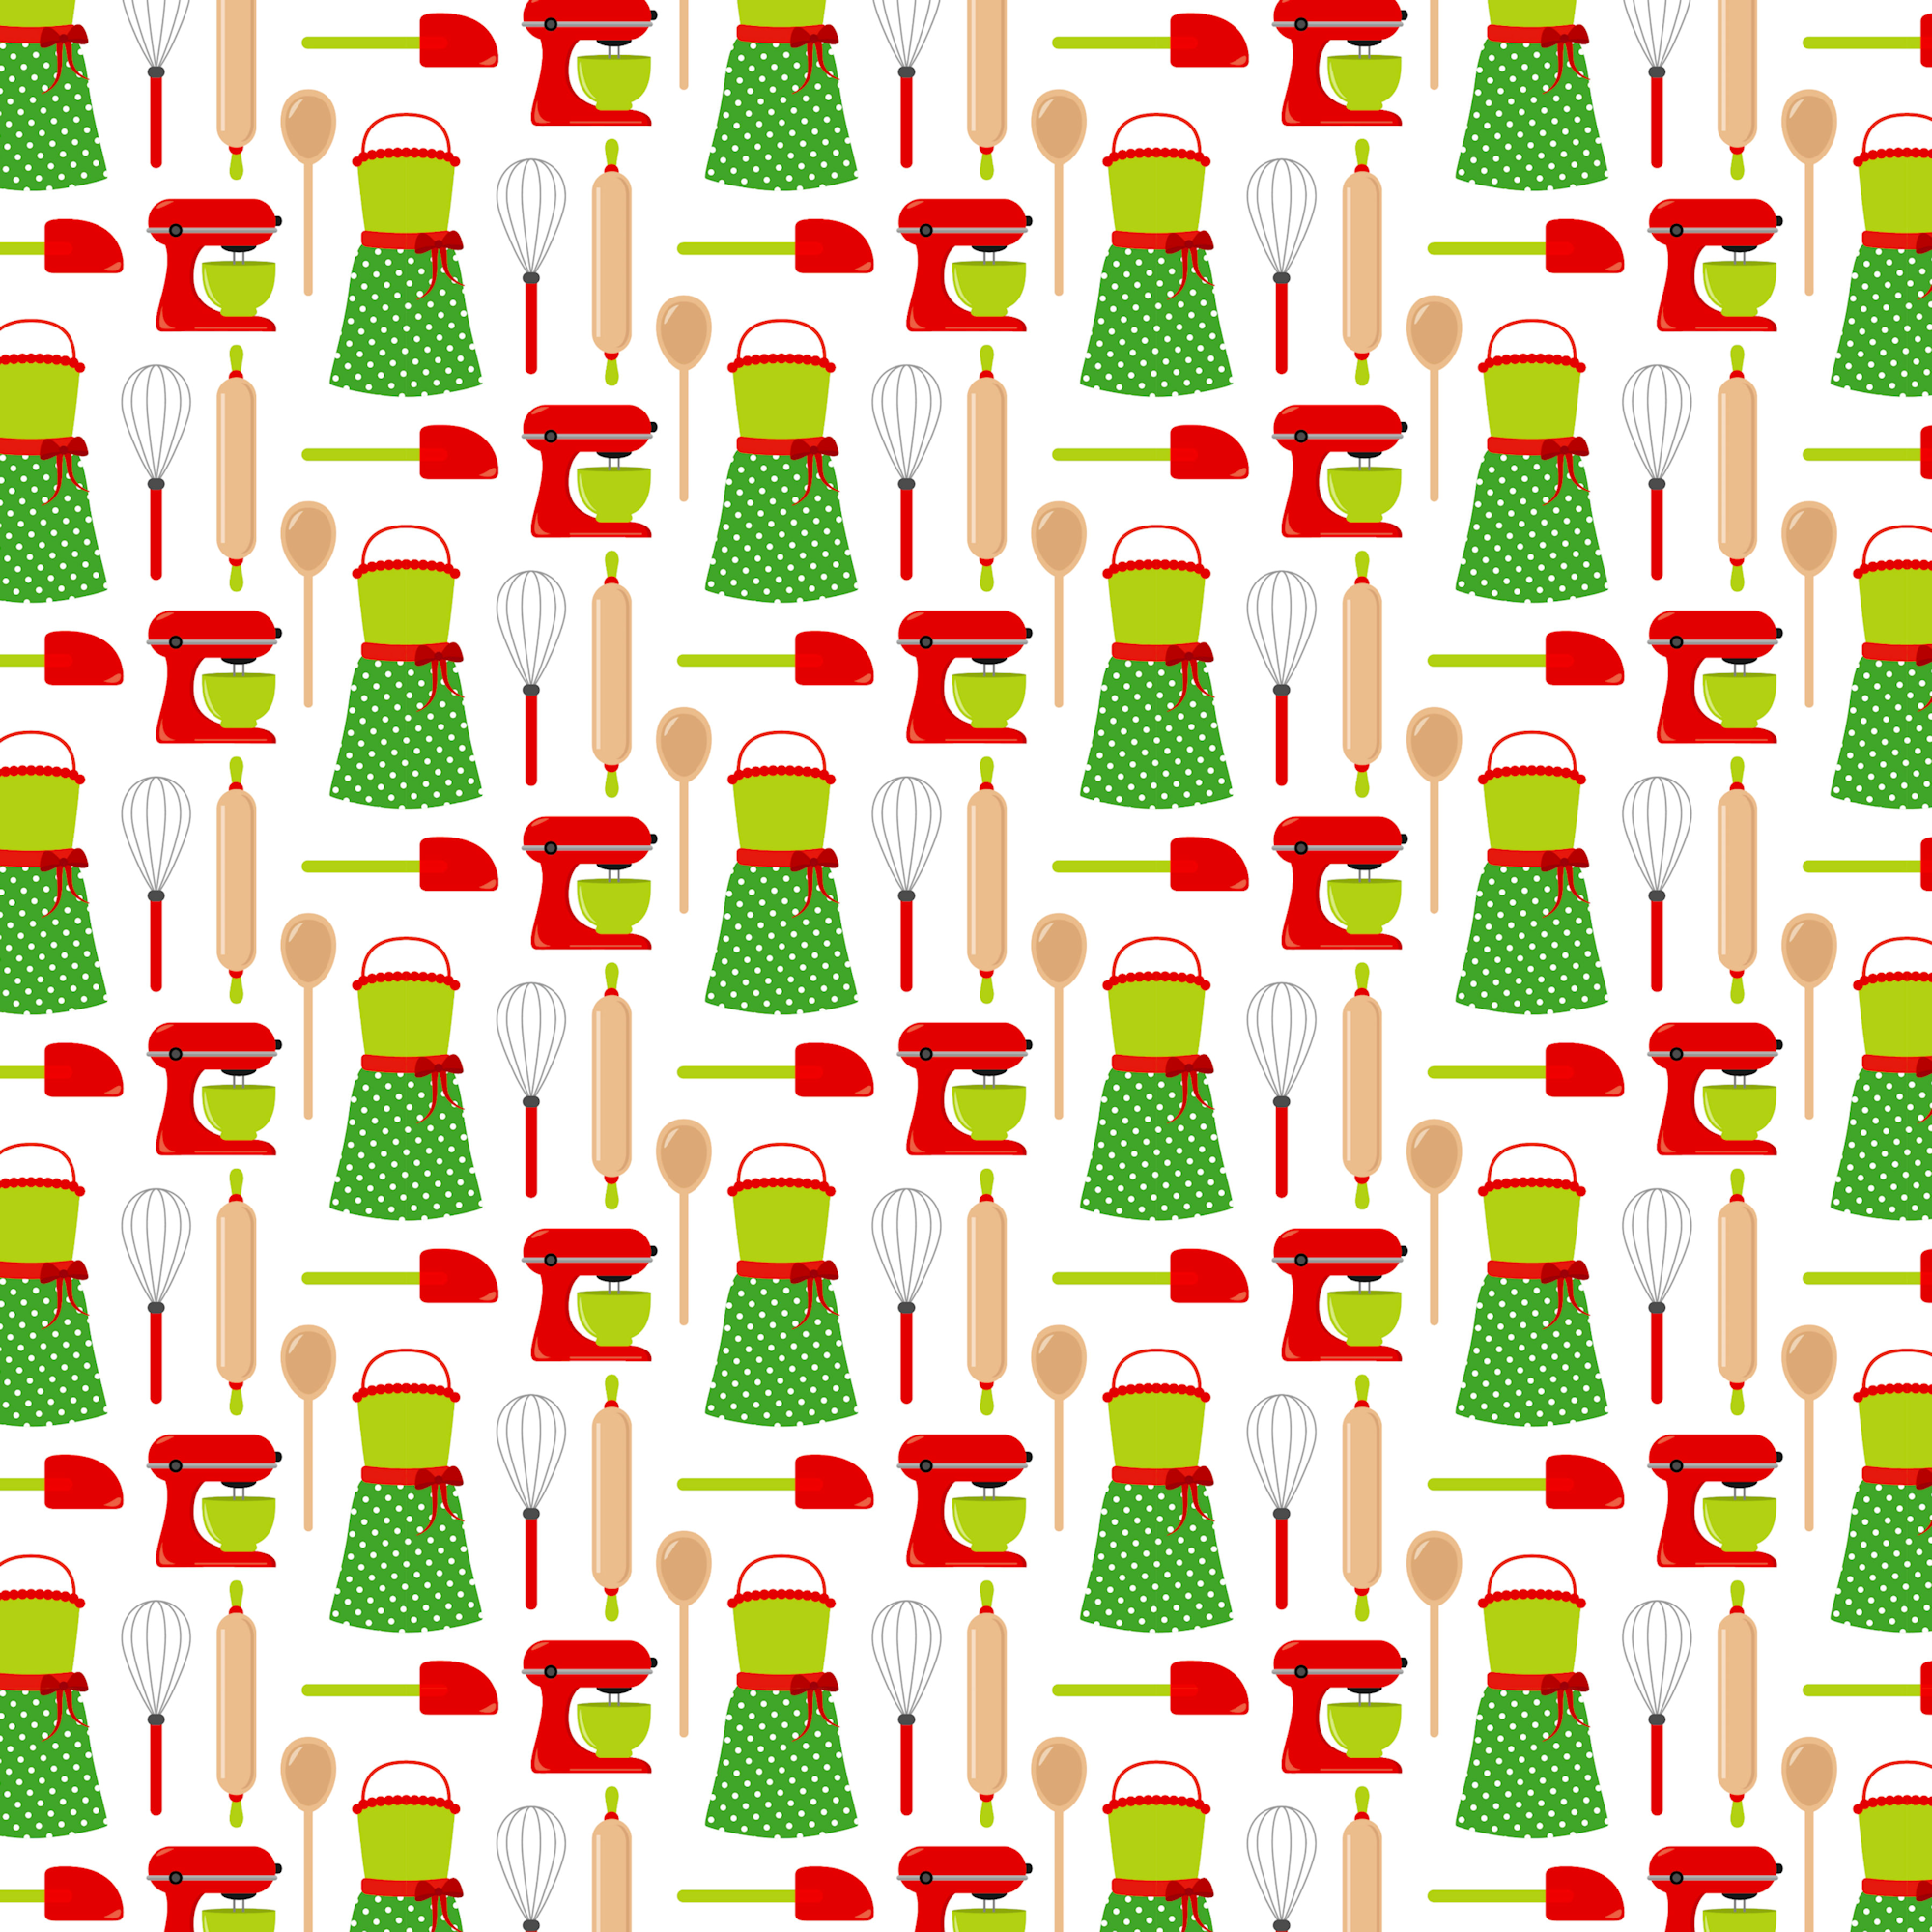 Christmas Baking Collection Aprons A Plenty 12 x 12 Double-Sided Scrapbook Paper by SSC Designs